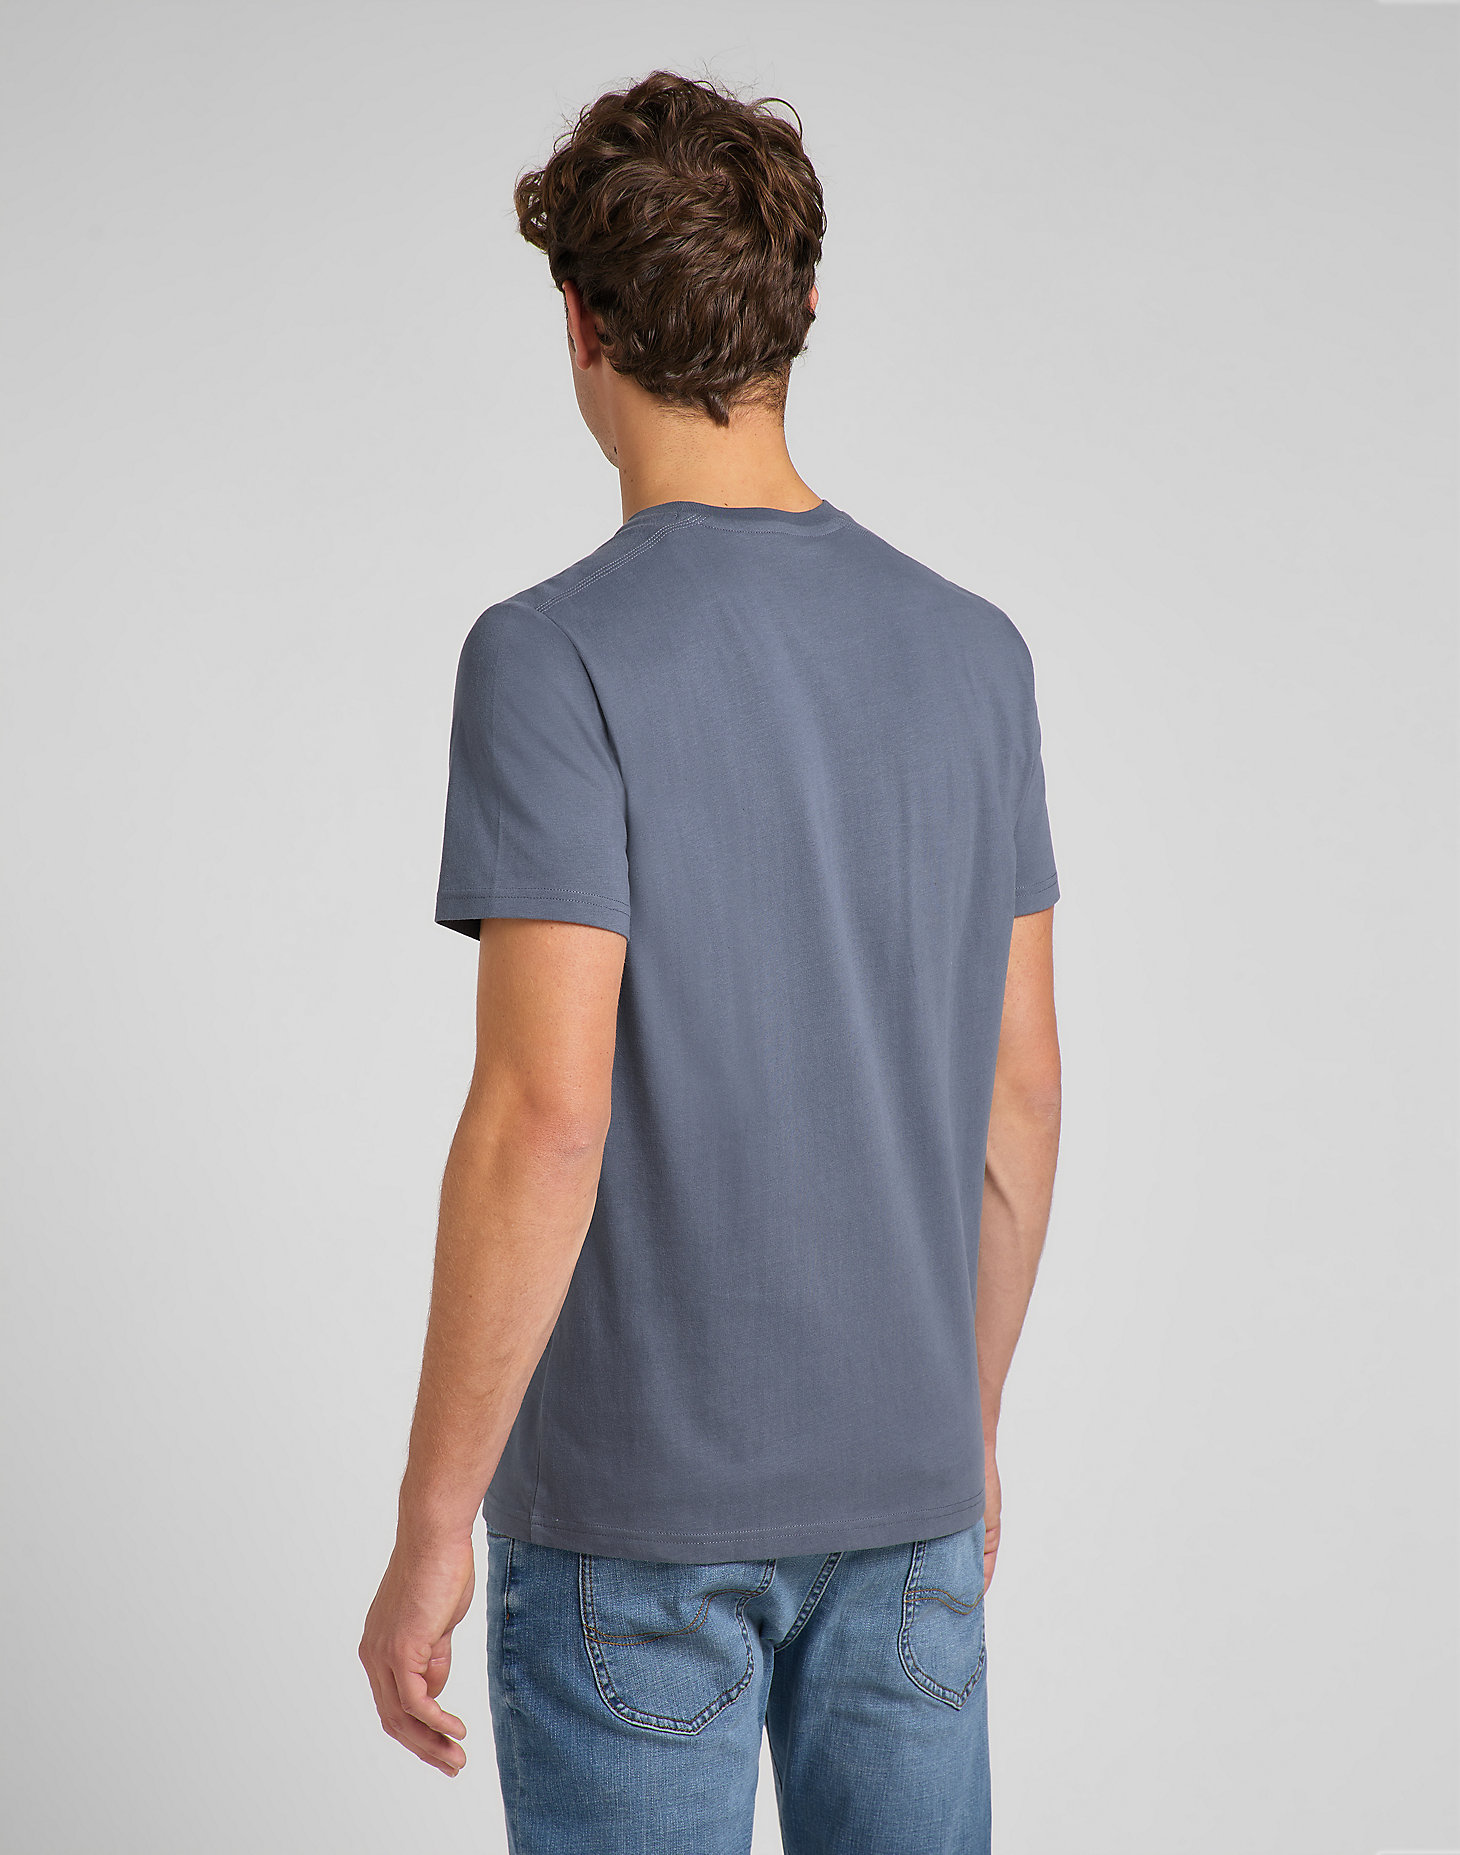 Branded Tee in Washed Grey alternative view 1